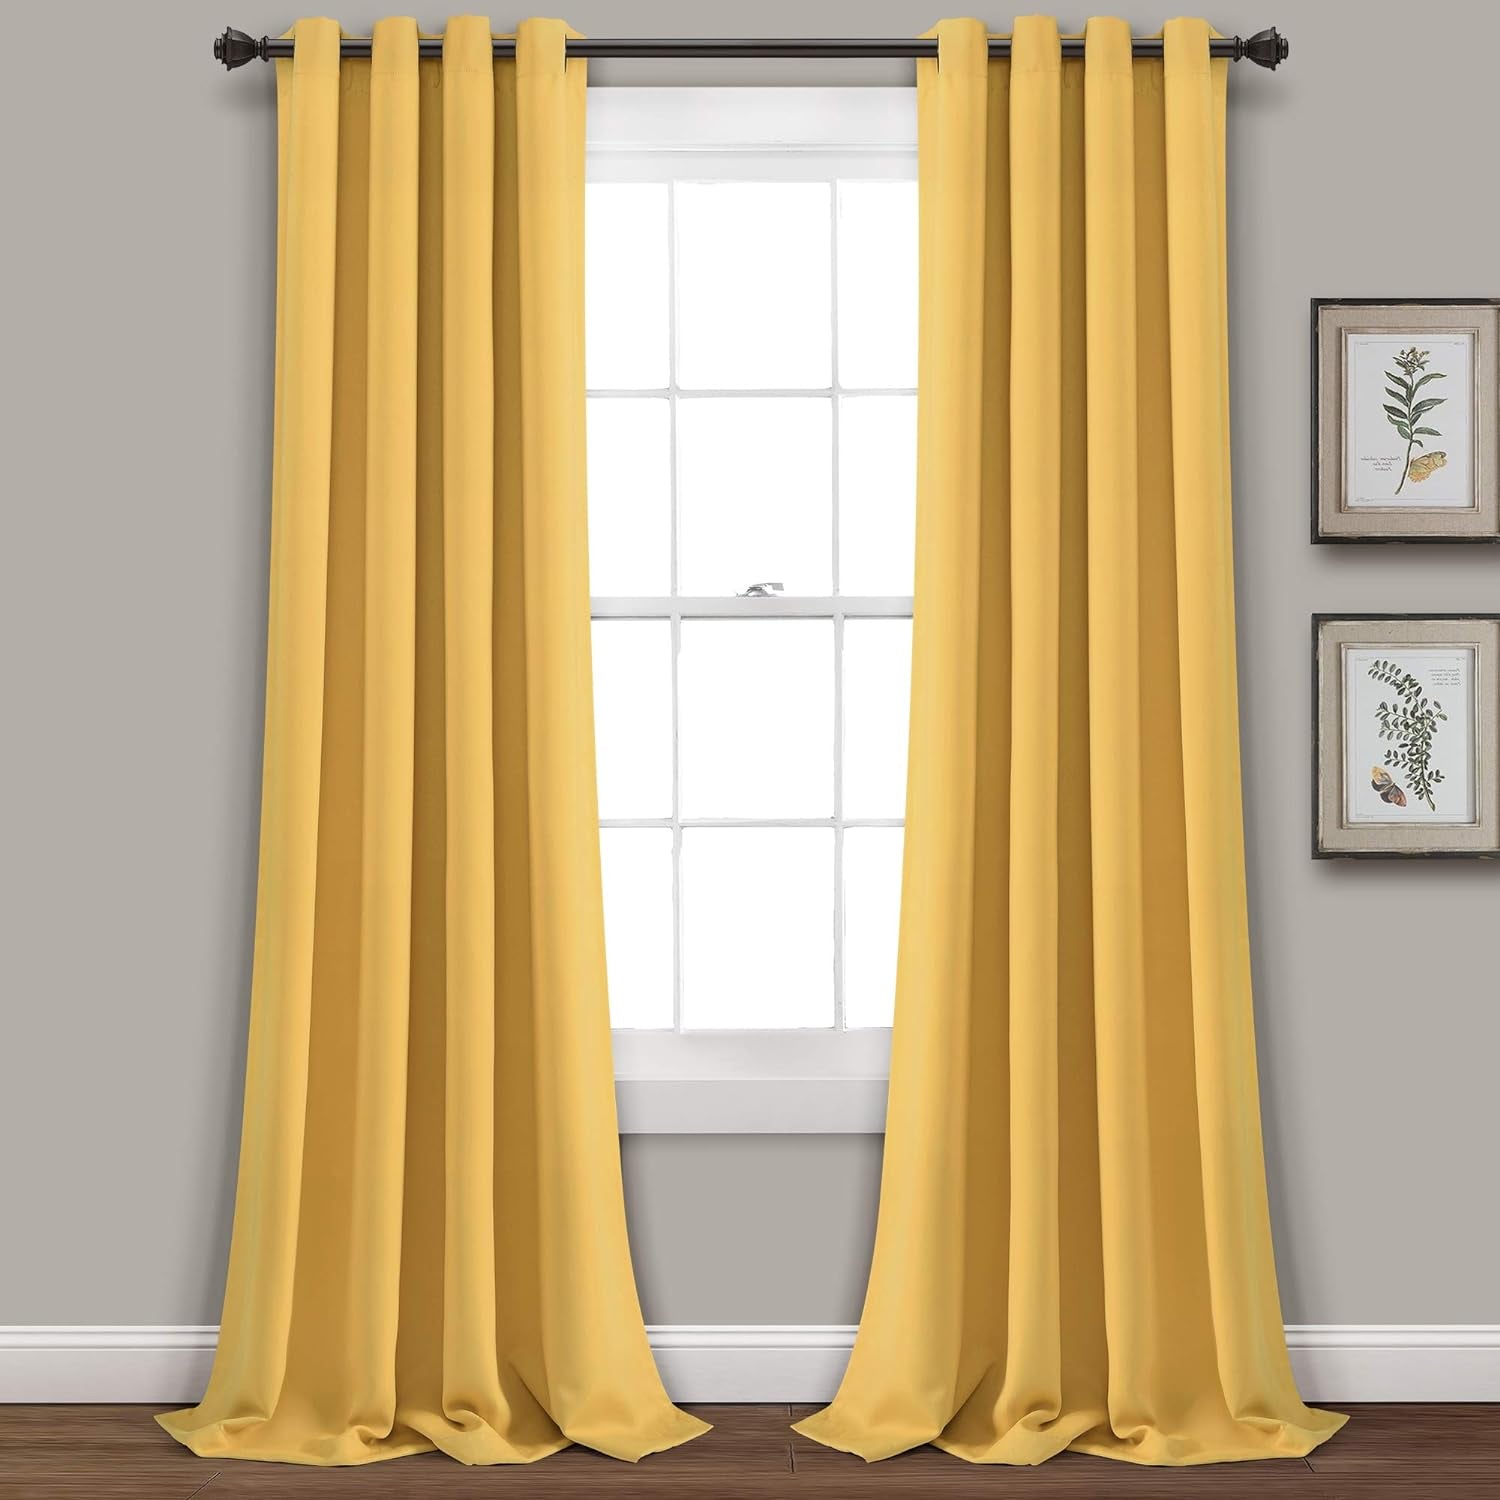 Lush Decor Insulated Grommet Blackout Window Curtain Panels, Pair, 52" W X 120" L, Wheat - Classic Modern Design - 120 Inch Curtains - Extra Long Curtains for Living Room, Bedroom, or Dining Room  Triangle Home Fashions Yellow 52"W X 120"L 